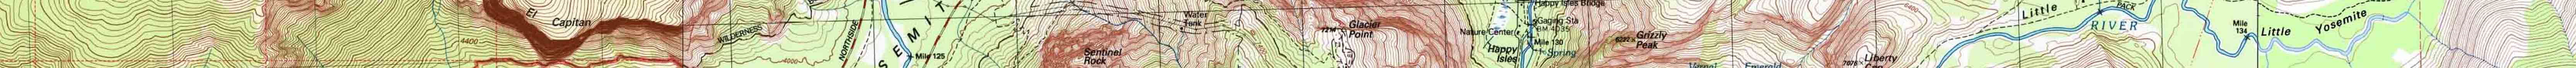 Yosemite Valey backpacking map featuring JMT to Tuolumne Meadows and alternative route over Voglesang Pass to Lyell Canyon.